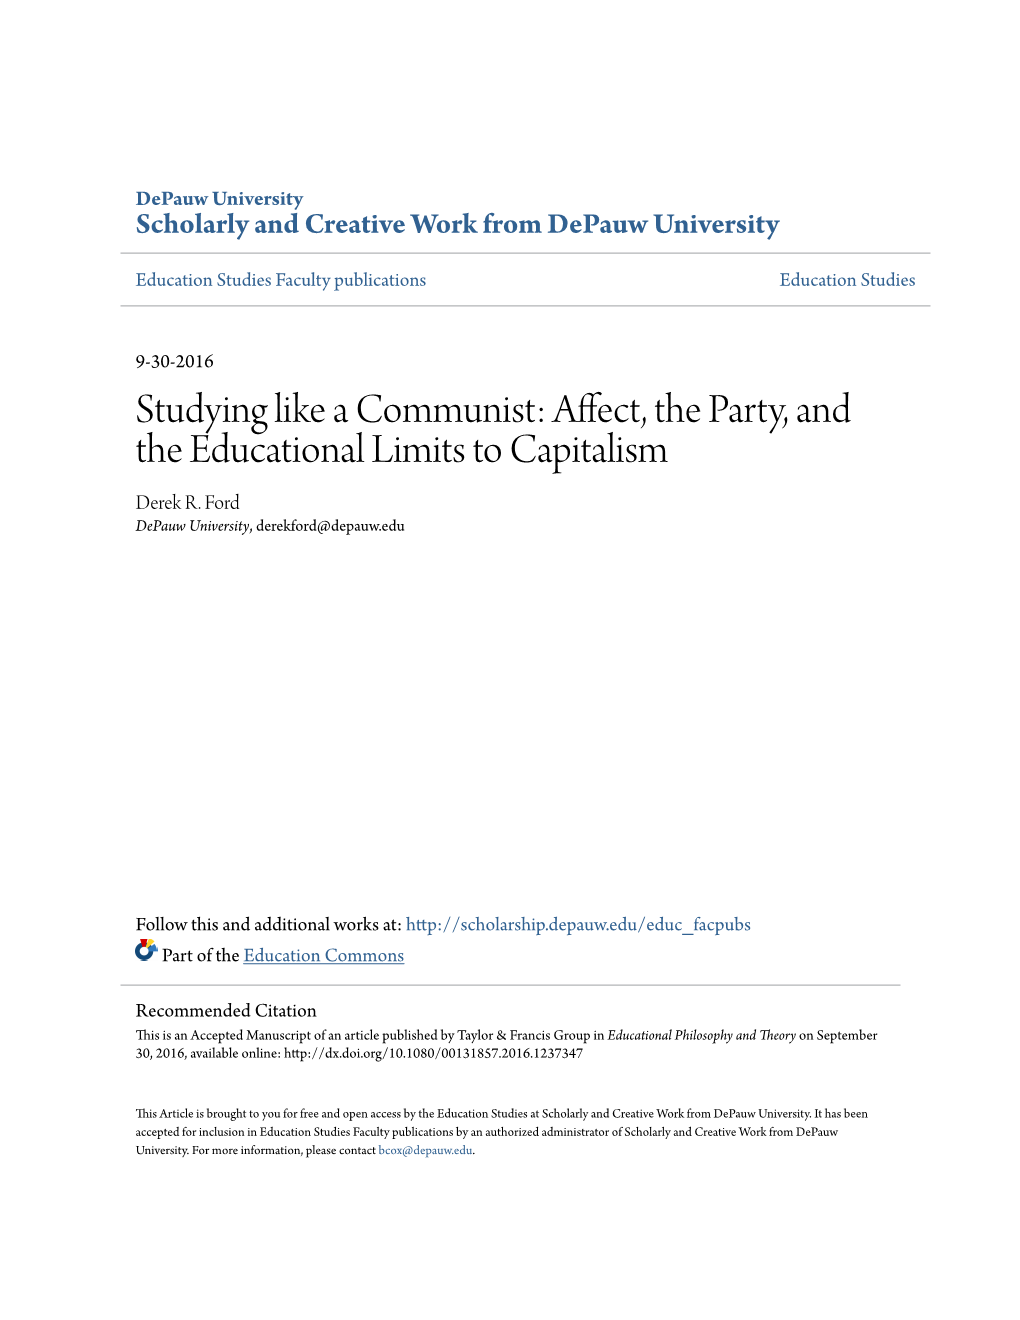 Studying Like a Communist: Affect, the Party, and the Educational Limits to Capitalism Derek R